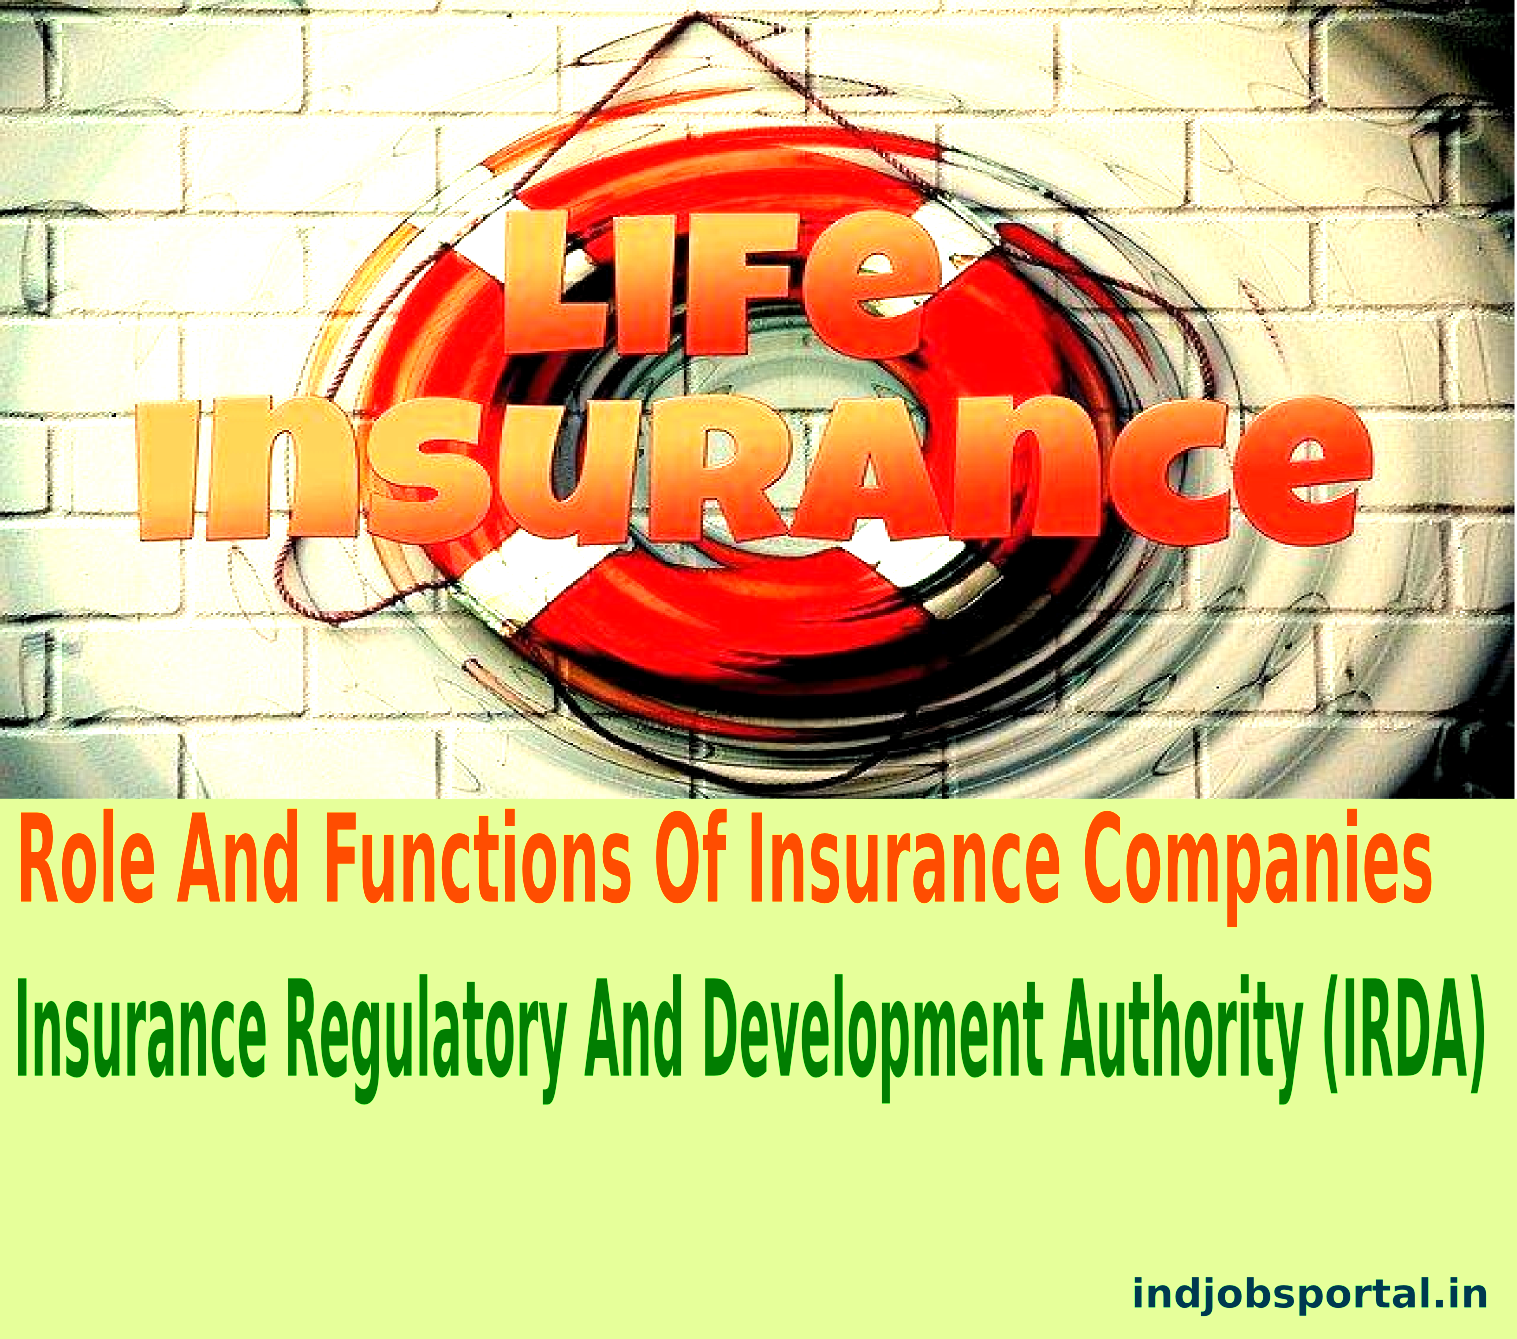 Role And Functions Of Insurance Companies, Insurance Regulatory And Development Authority (IRDA)